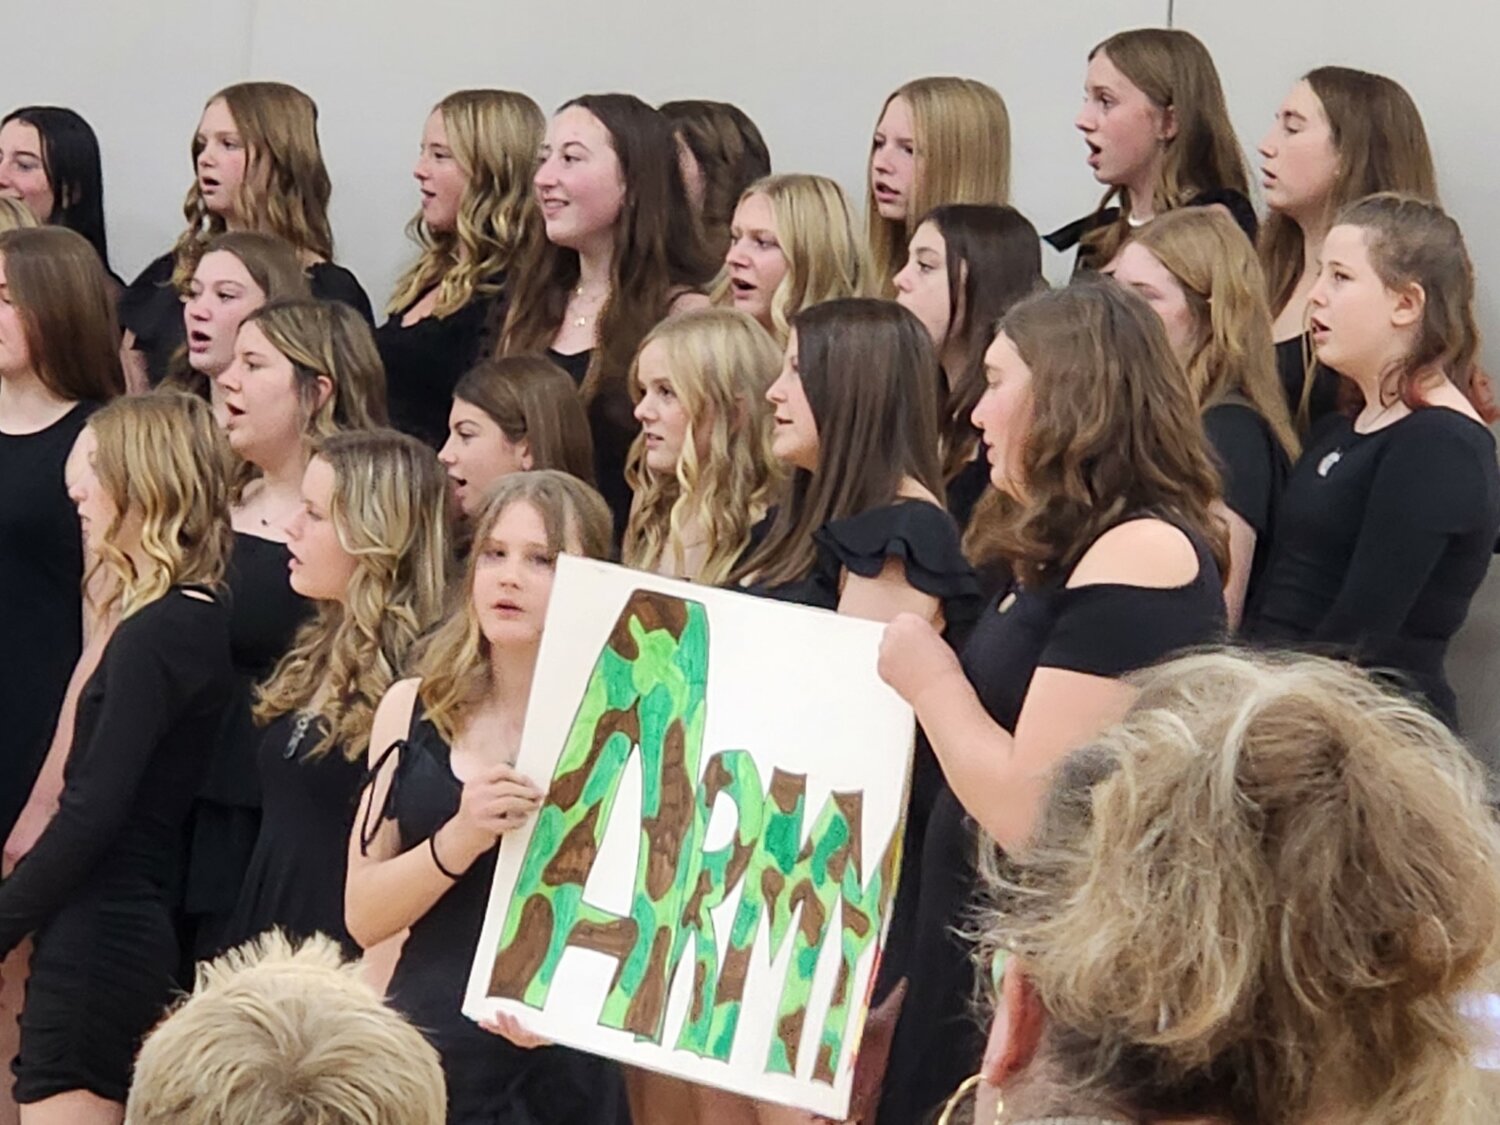 Eighth grade choir students hold an “Army” during “A Tribute to the Armed Services,” asking those who had served in the Army to stand up for recognition Friday, Nov. 10.